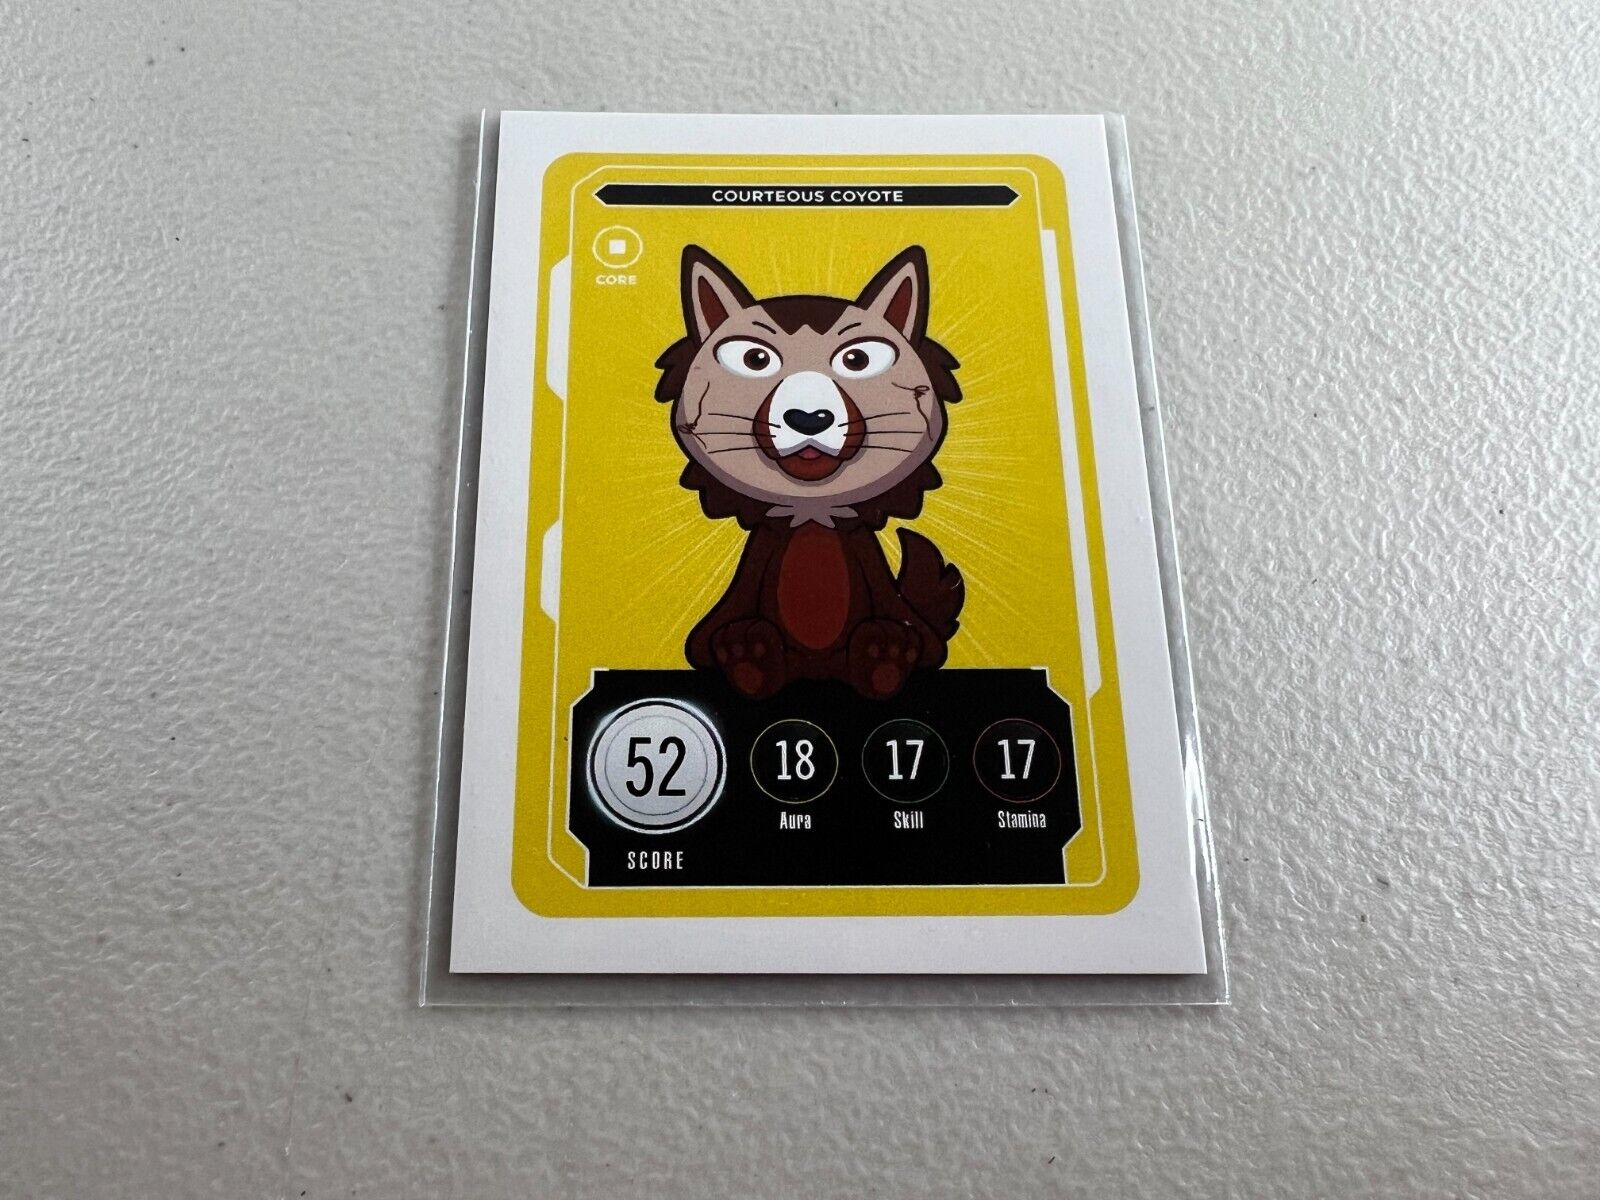 Courteous Coyote VeeFriends Series 2 Compete and Collect Core Card Gary Vee